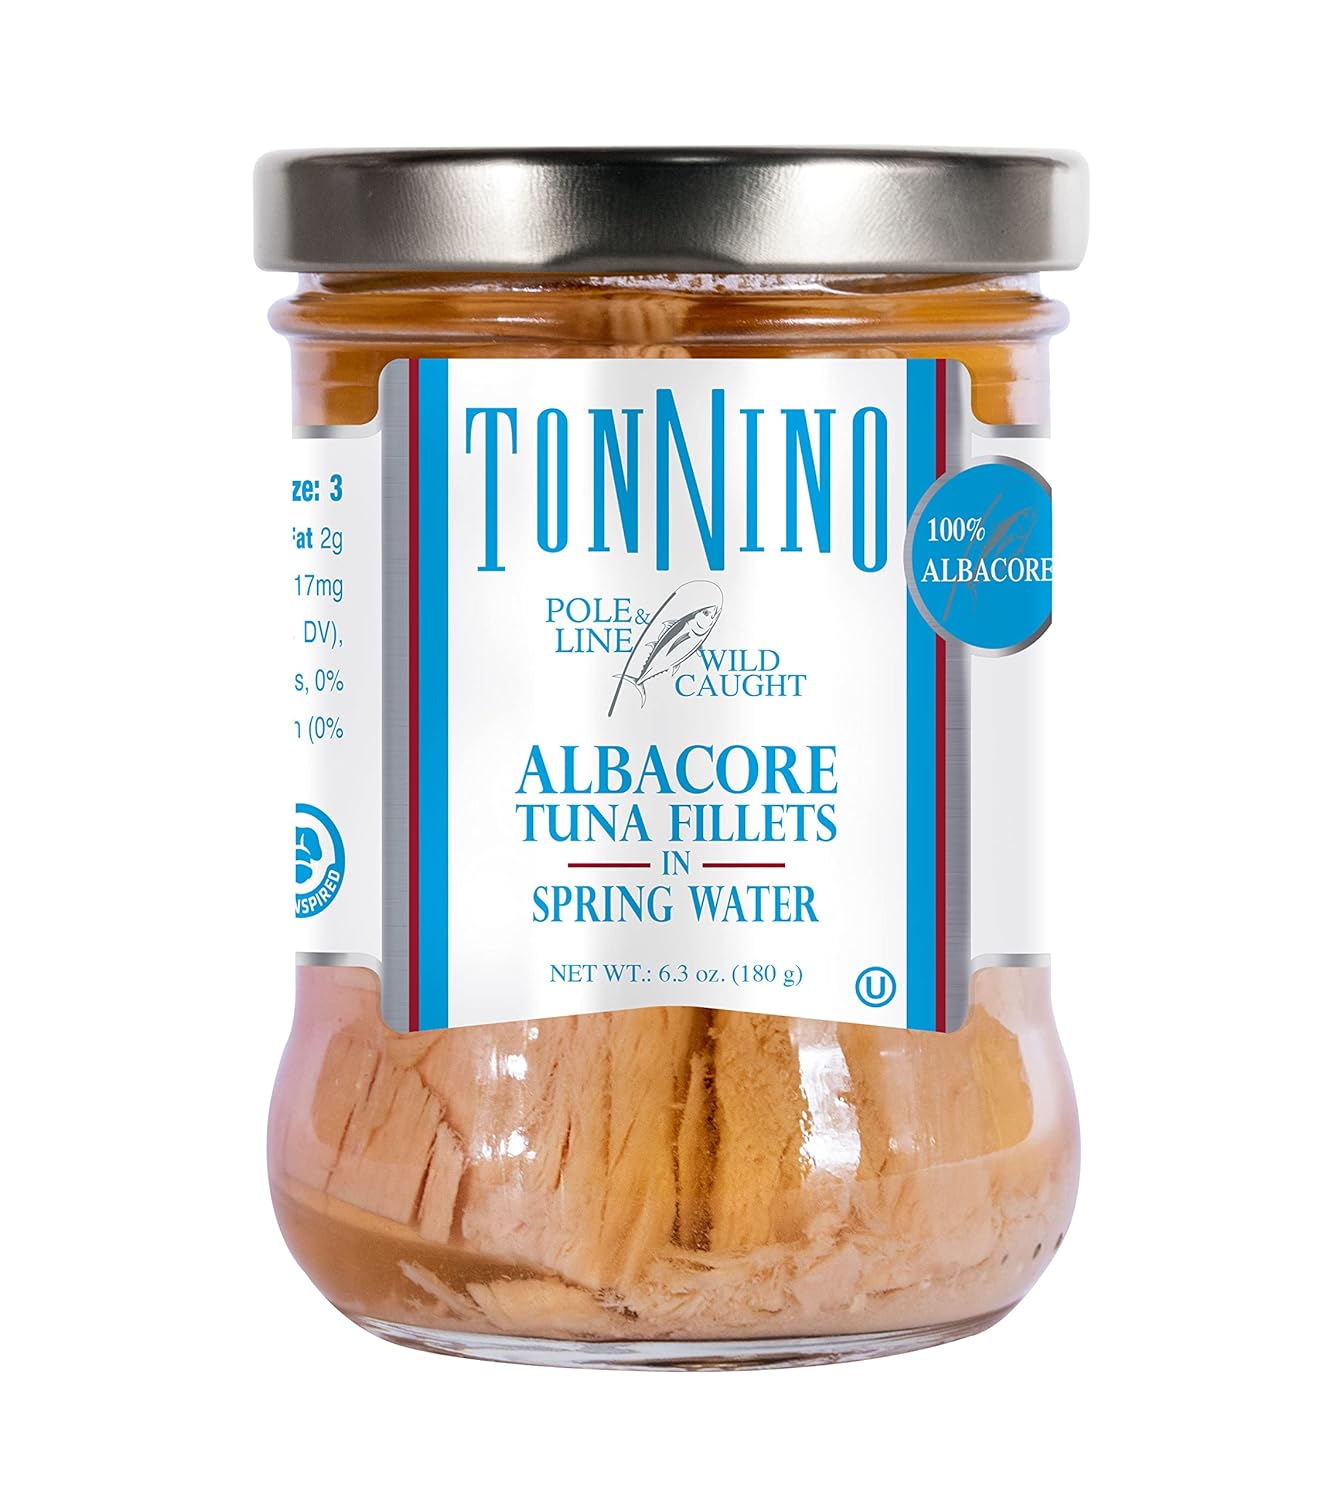 Tonnino Albacore Tuna in Water 6.3 oz - Premium 6-Pack Omega-3 Rich, High Protein, Gluten-Free, Ready-to-Eat Tuna Packets for Tuna Salad, Tuna Fish Alternative to Salmon, Kosher, Pole & Line Caught : Grocery & Gourmet Food